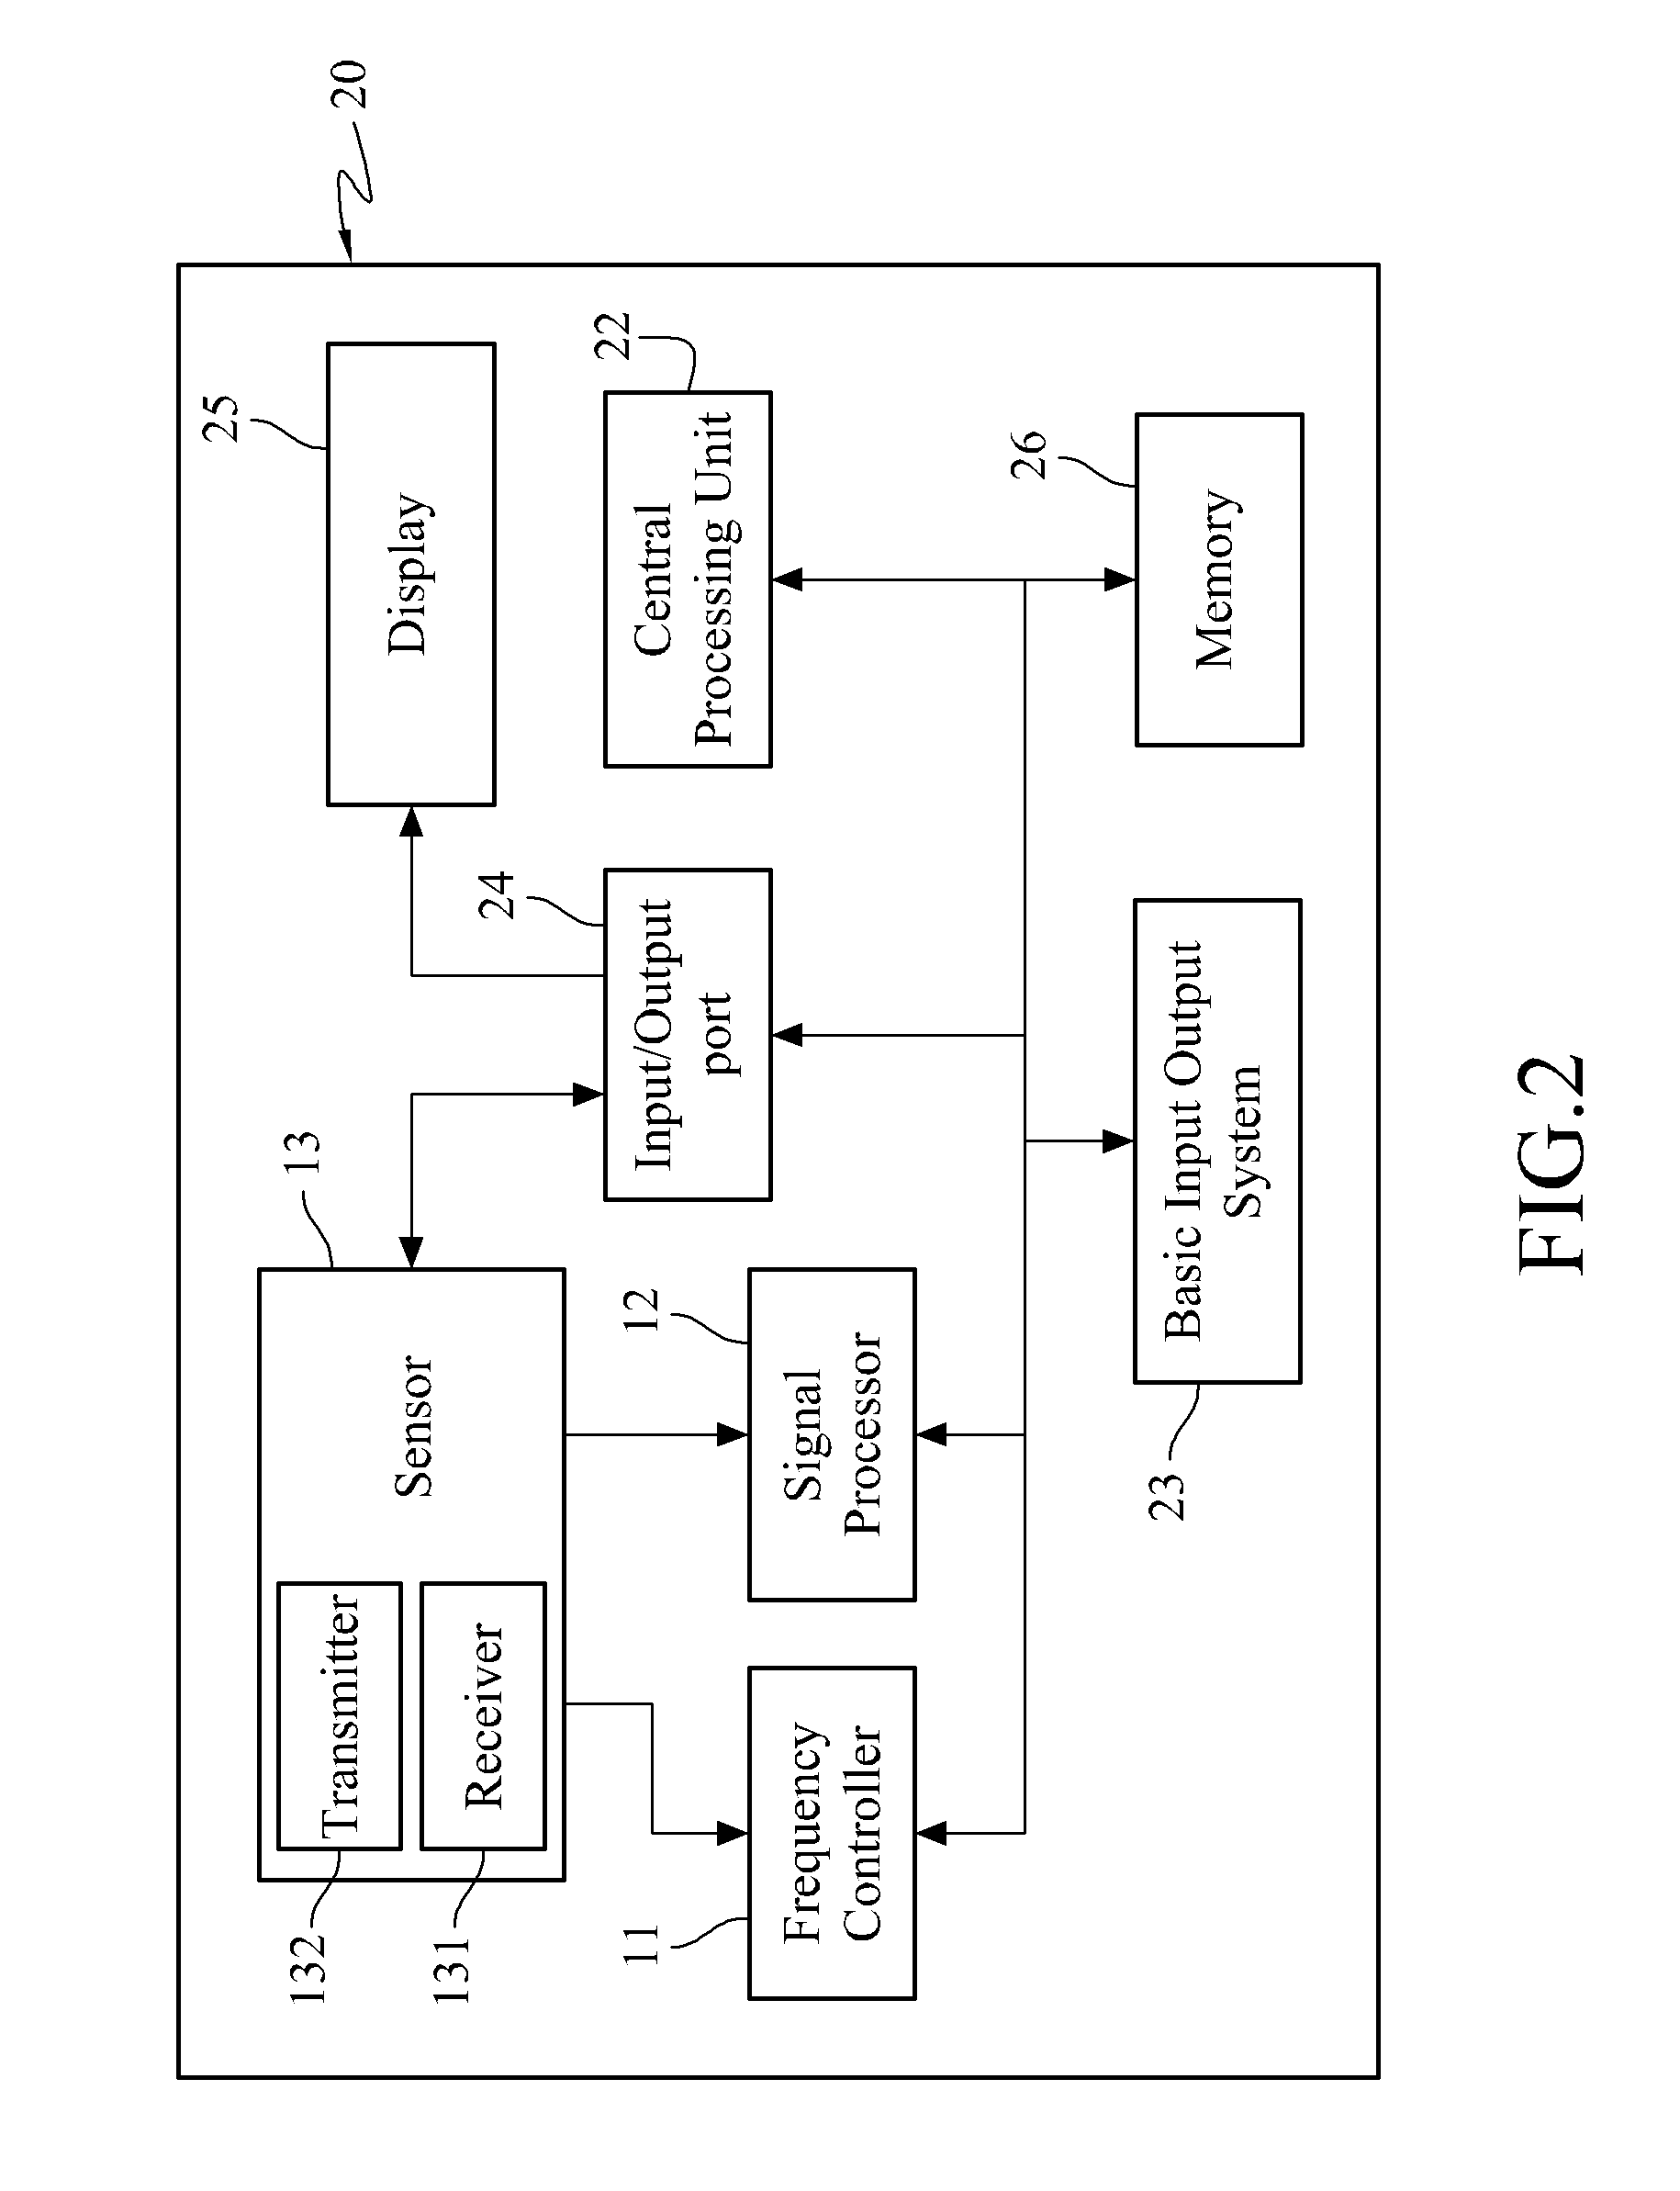 System for power management and safety protection and method thereof